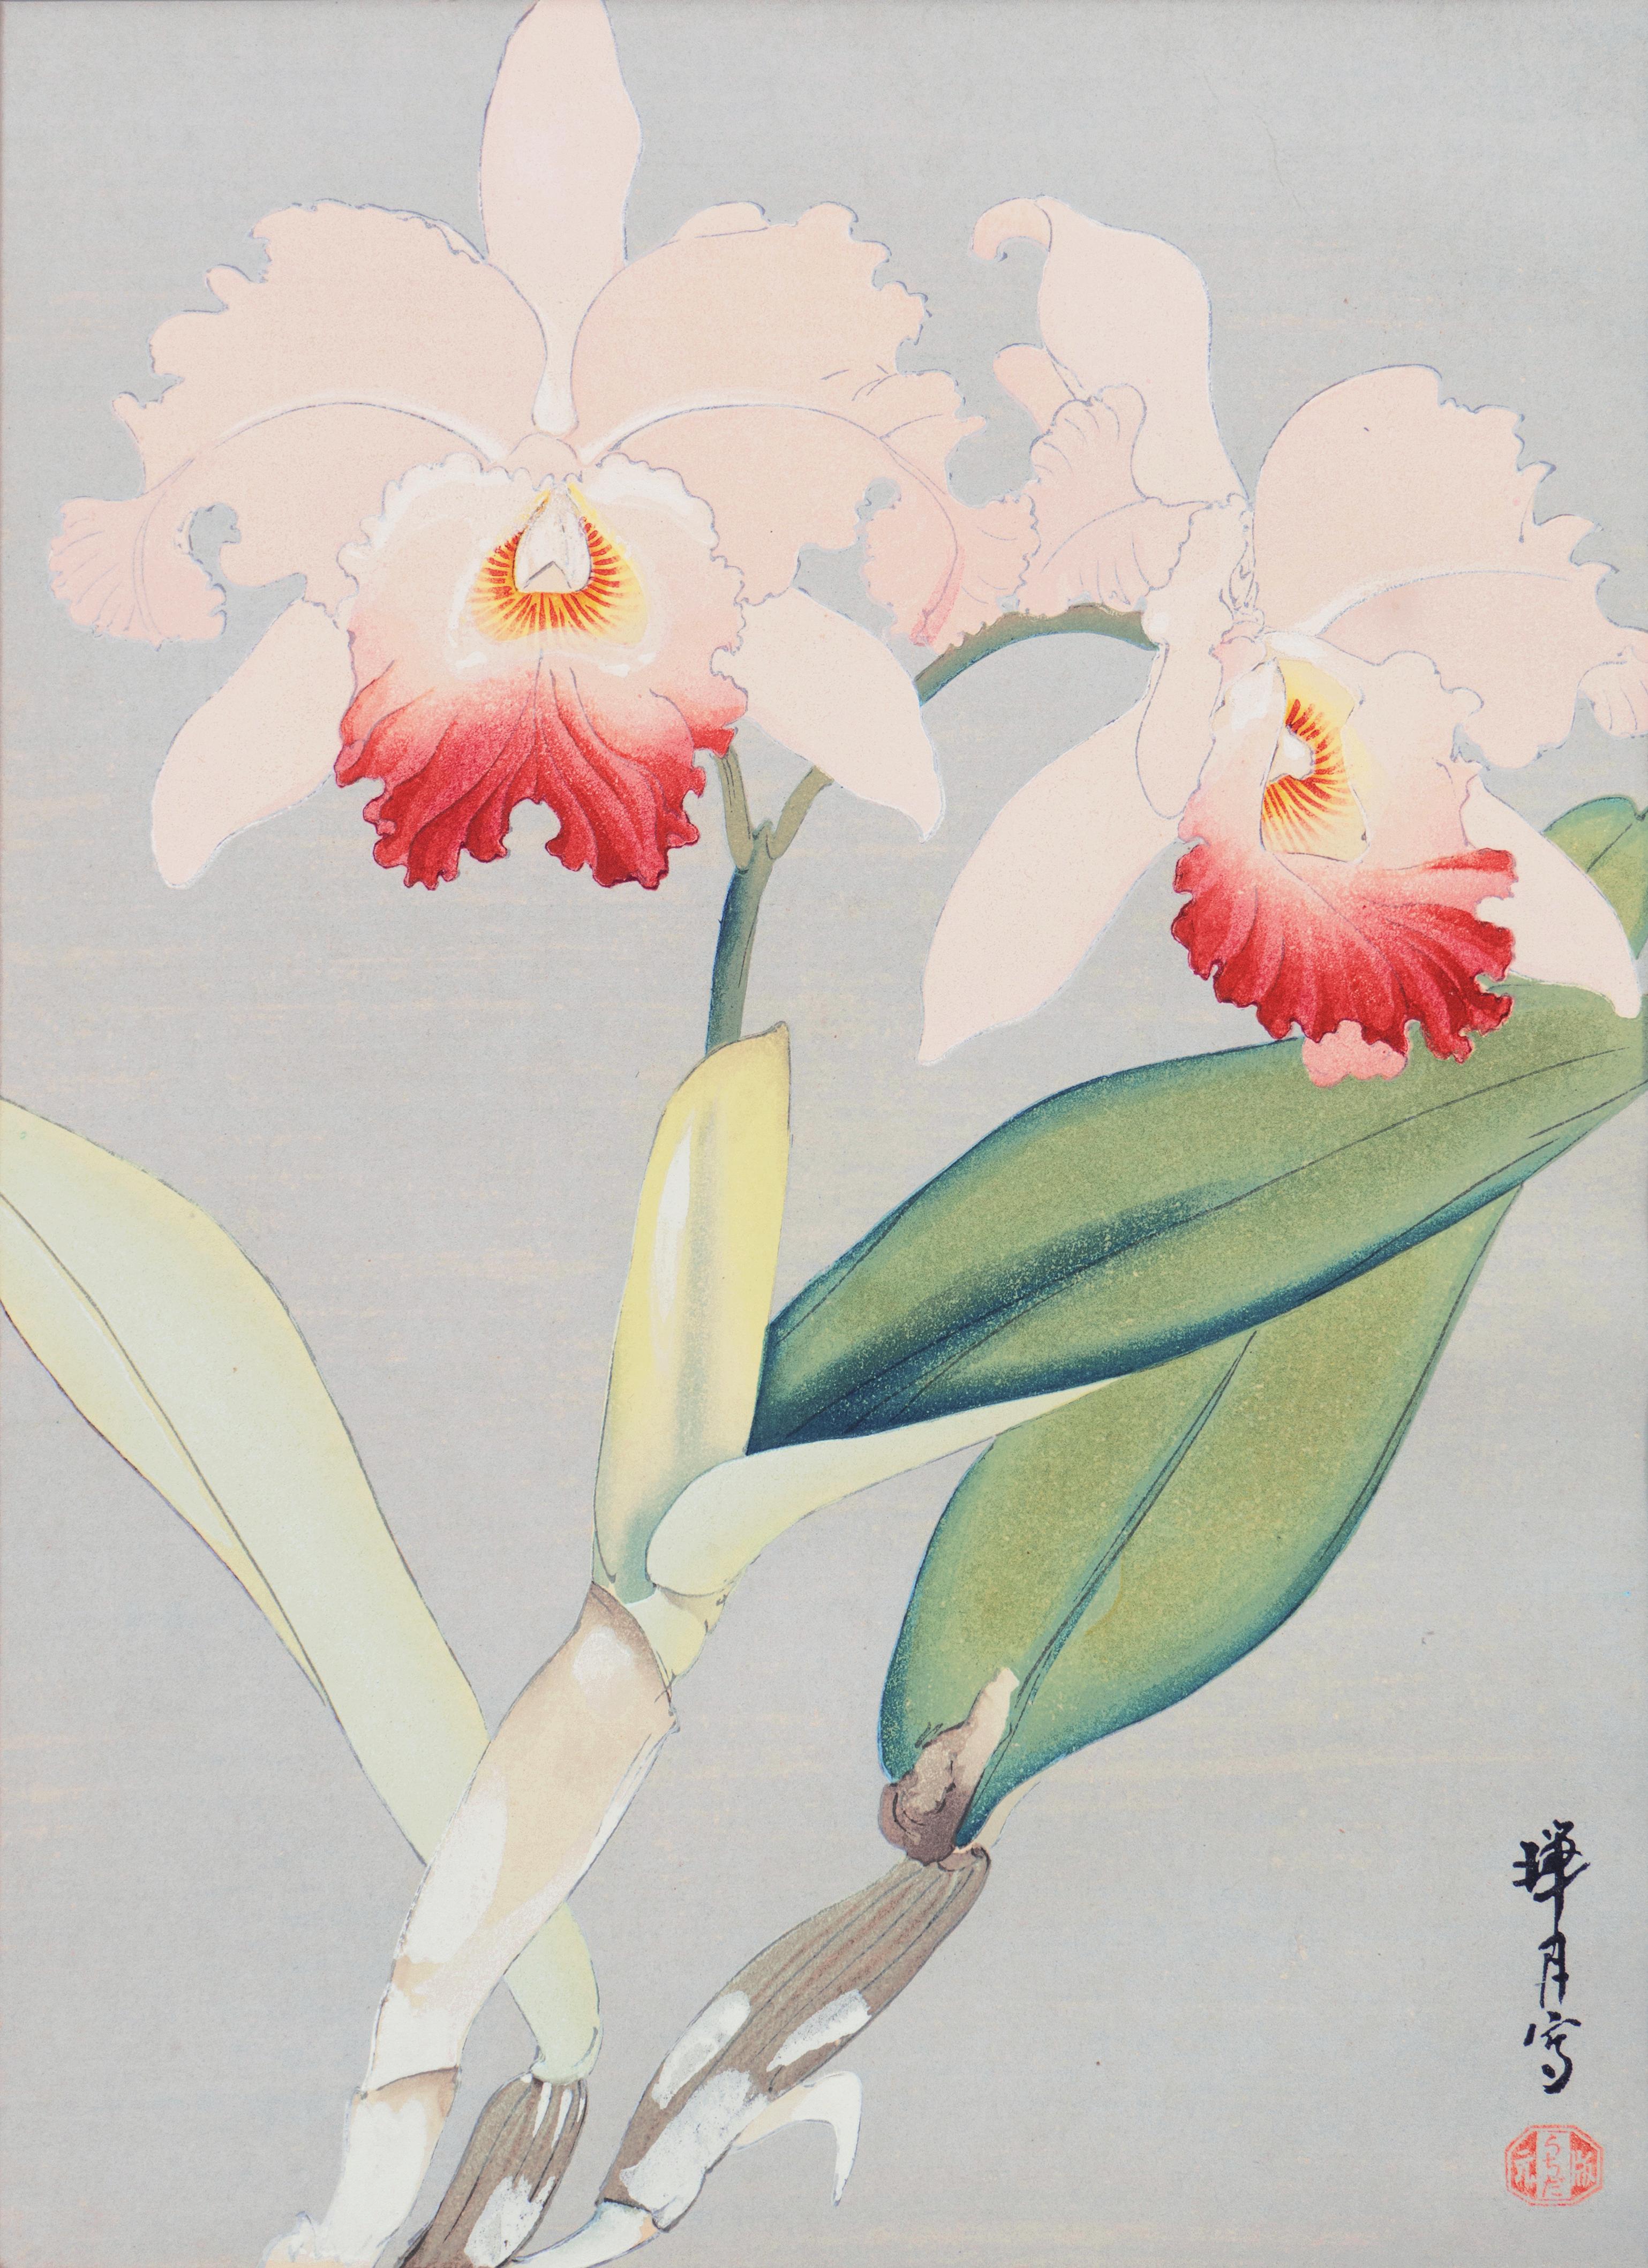 'Still Life of Orchids', Japanese Florilegium, color woodcut, Michigan, Kyoto - Print by Ikeda Zuigetsu